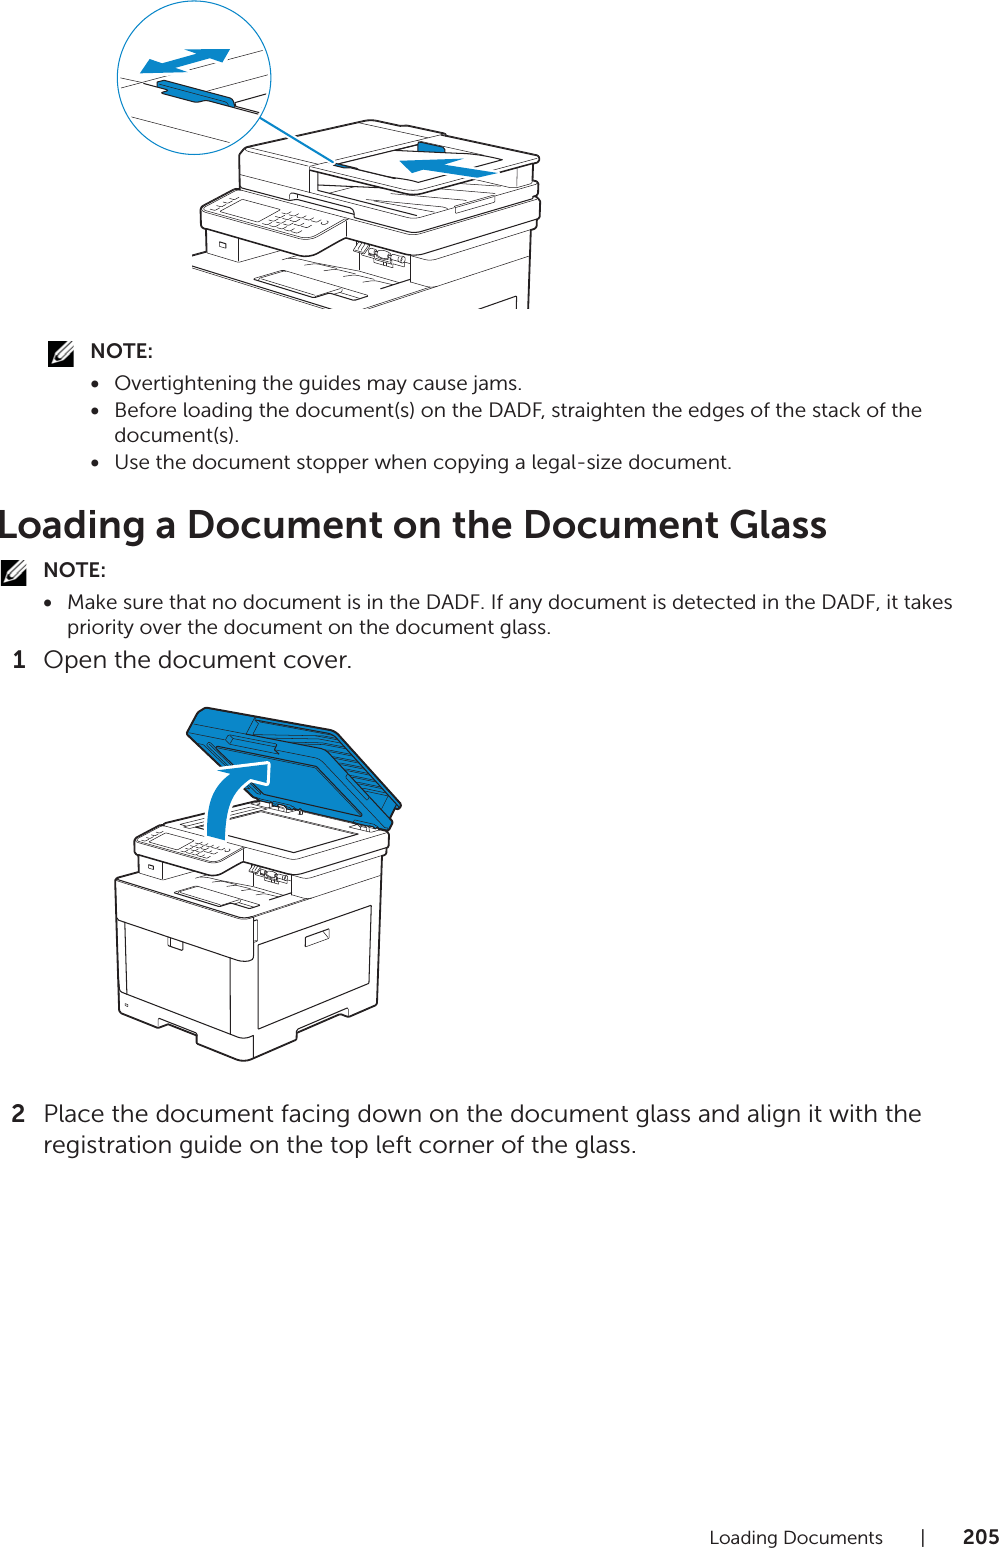 Loading Documents |205NOTE:•Overtightening the guides may cause jams.•Before loading the document(s) on the DADF, straighten the edges of the stack of the document(s).•Use the document stopper when copying a legal-size document.Loading a Document on the Document GlassNOTE:•Make sure that no document is in the DADF. If any document is detected in the DADF, it takes priority over the document on the document glass.1Open the document cover.2Place the document facing down on the document glass and align it with the registration guide on the top left corner of the glass.